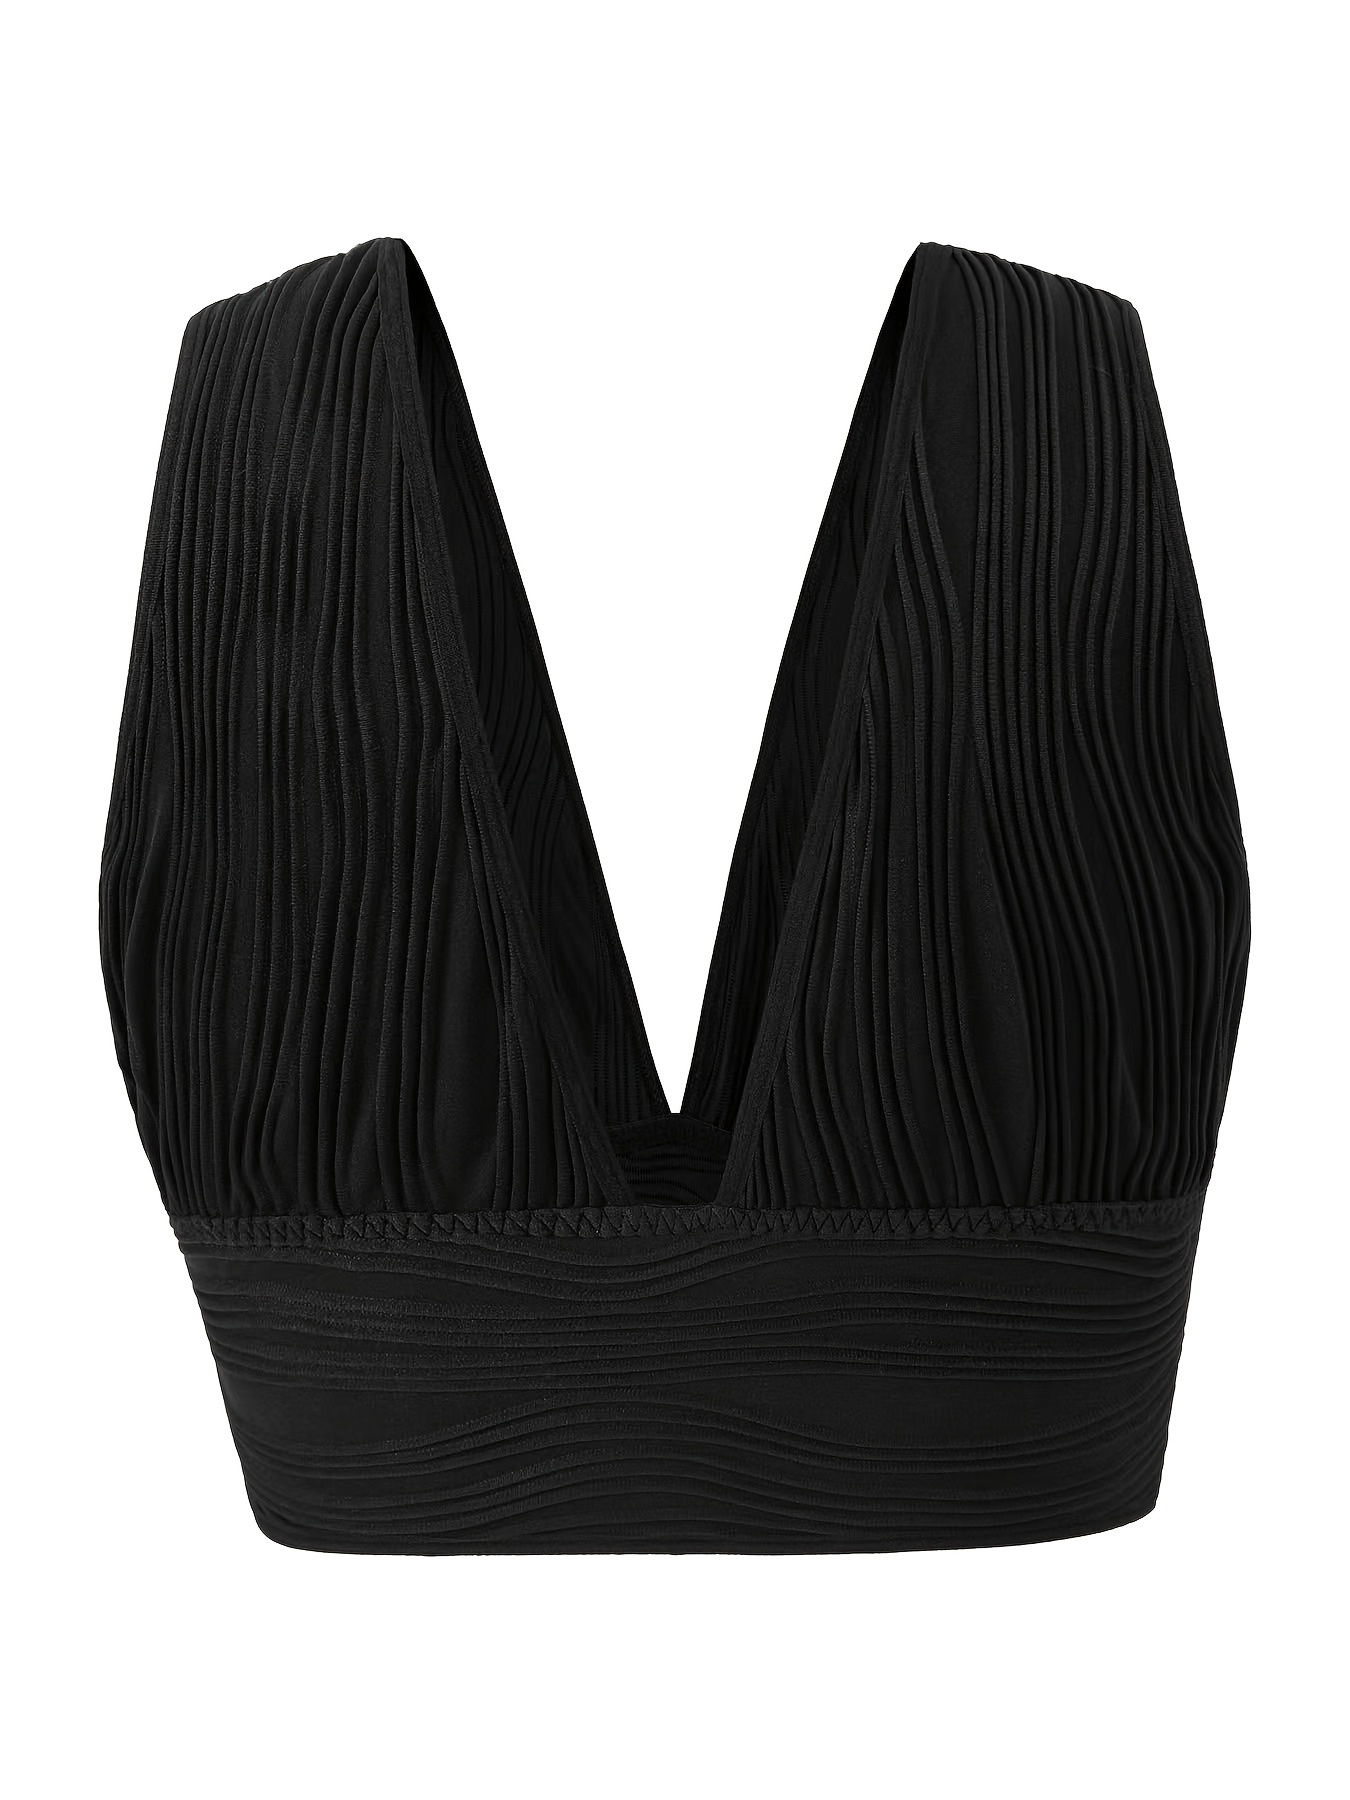 Plus Size Sexy Bra, Women's Plus Solid Cut Out Cross Halter High Stretch  Strappy Bra